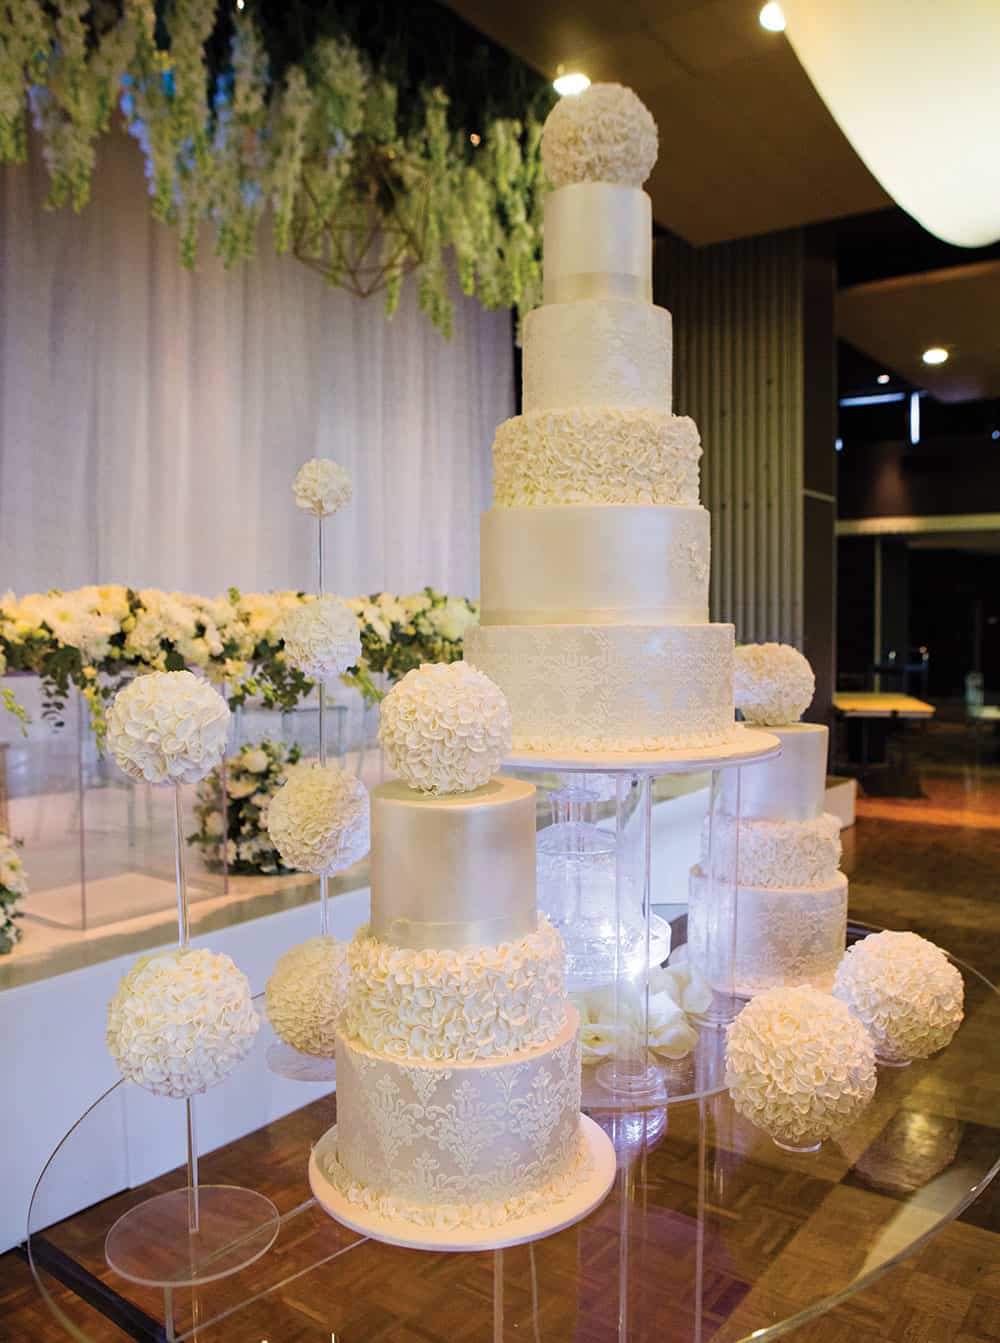 Acrylic tables with wedding cakes and florals.